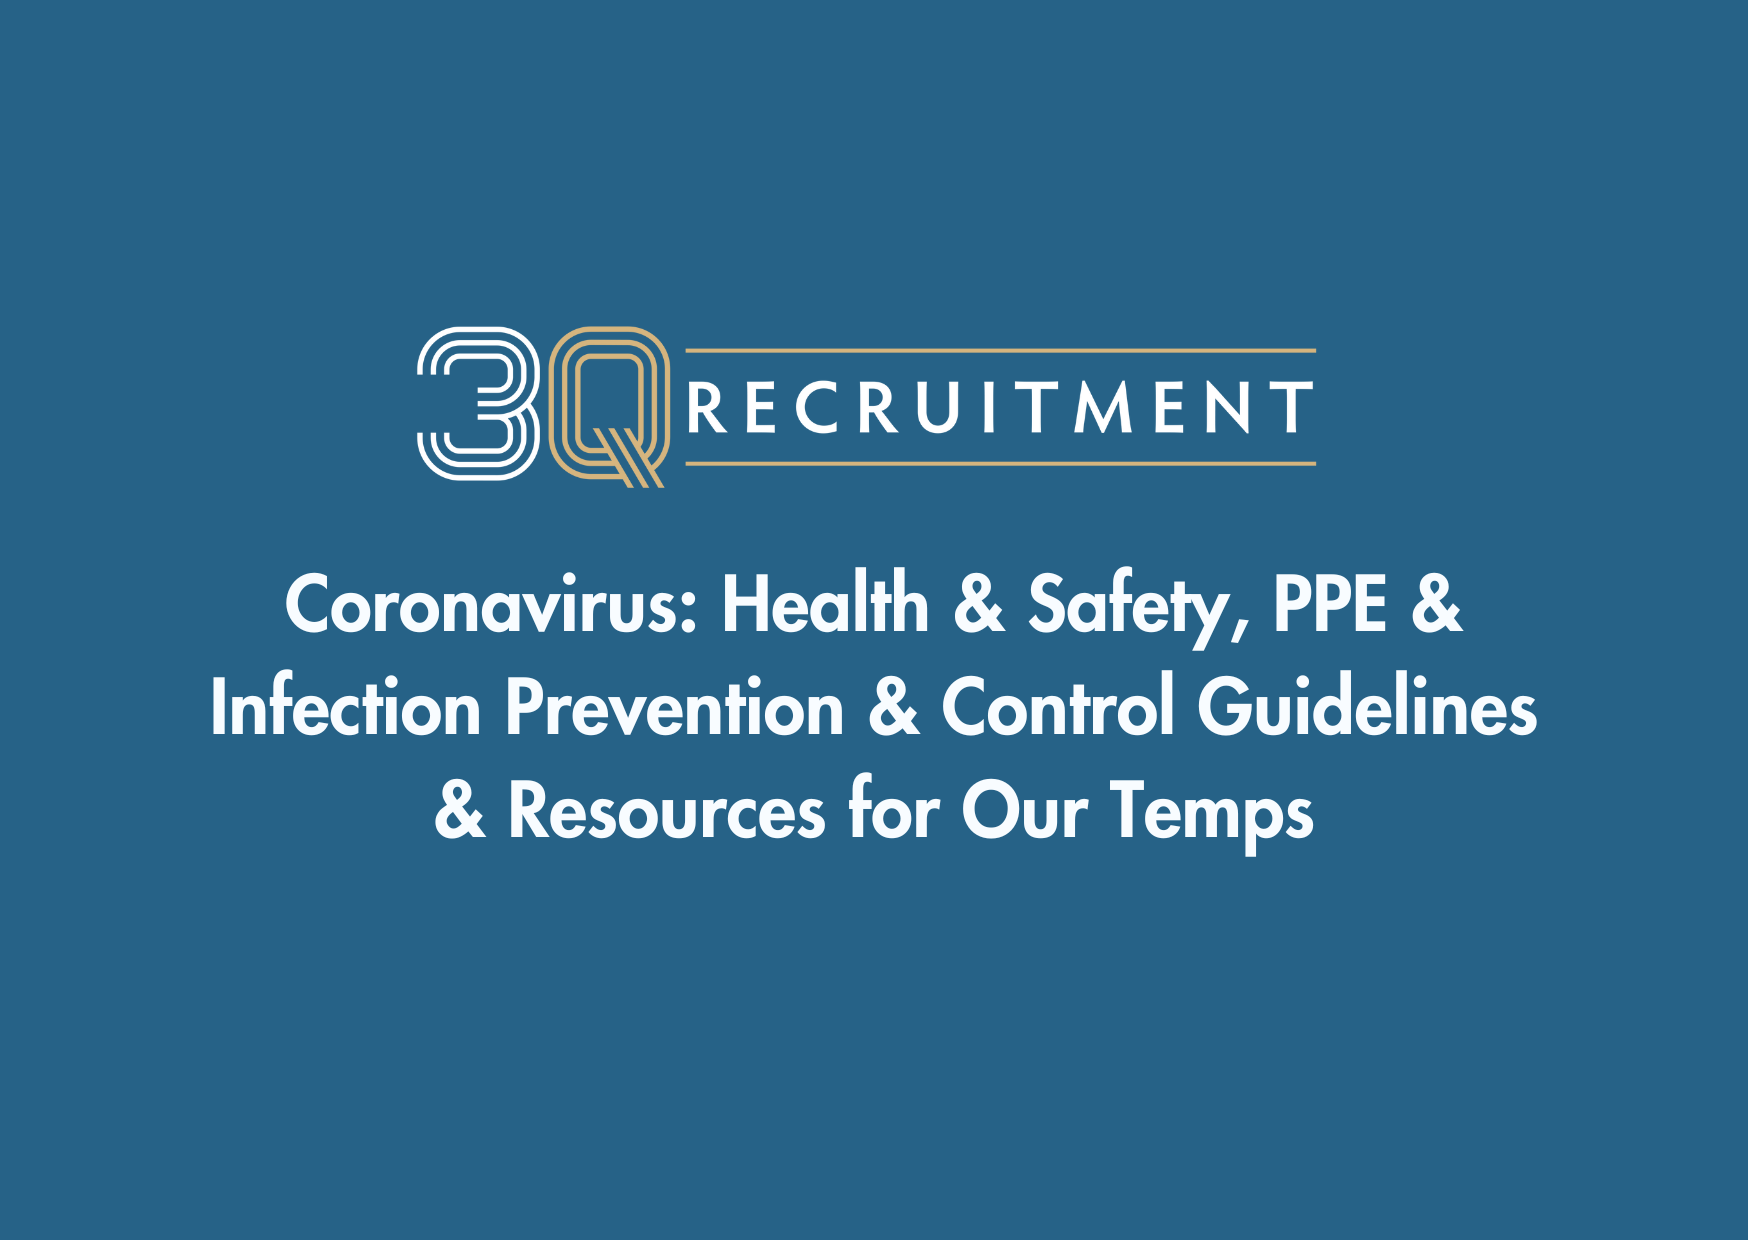 3Q Recruitment Coronavirus: Health & Safety, PPE & Infection Prevention & Control Guidelines & Resources for Our Temps